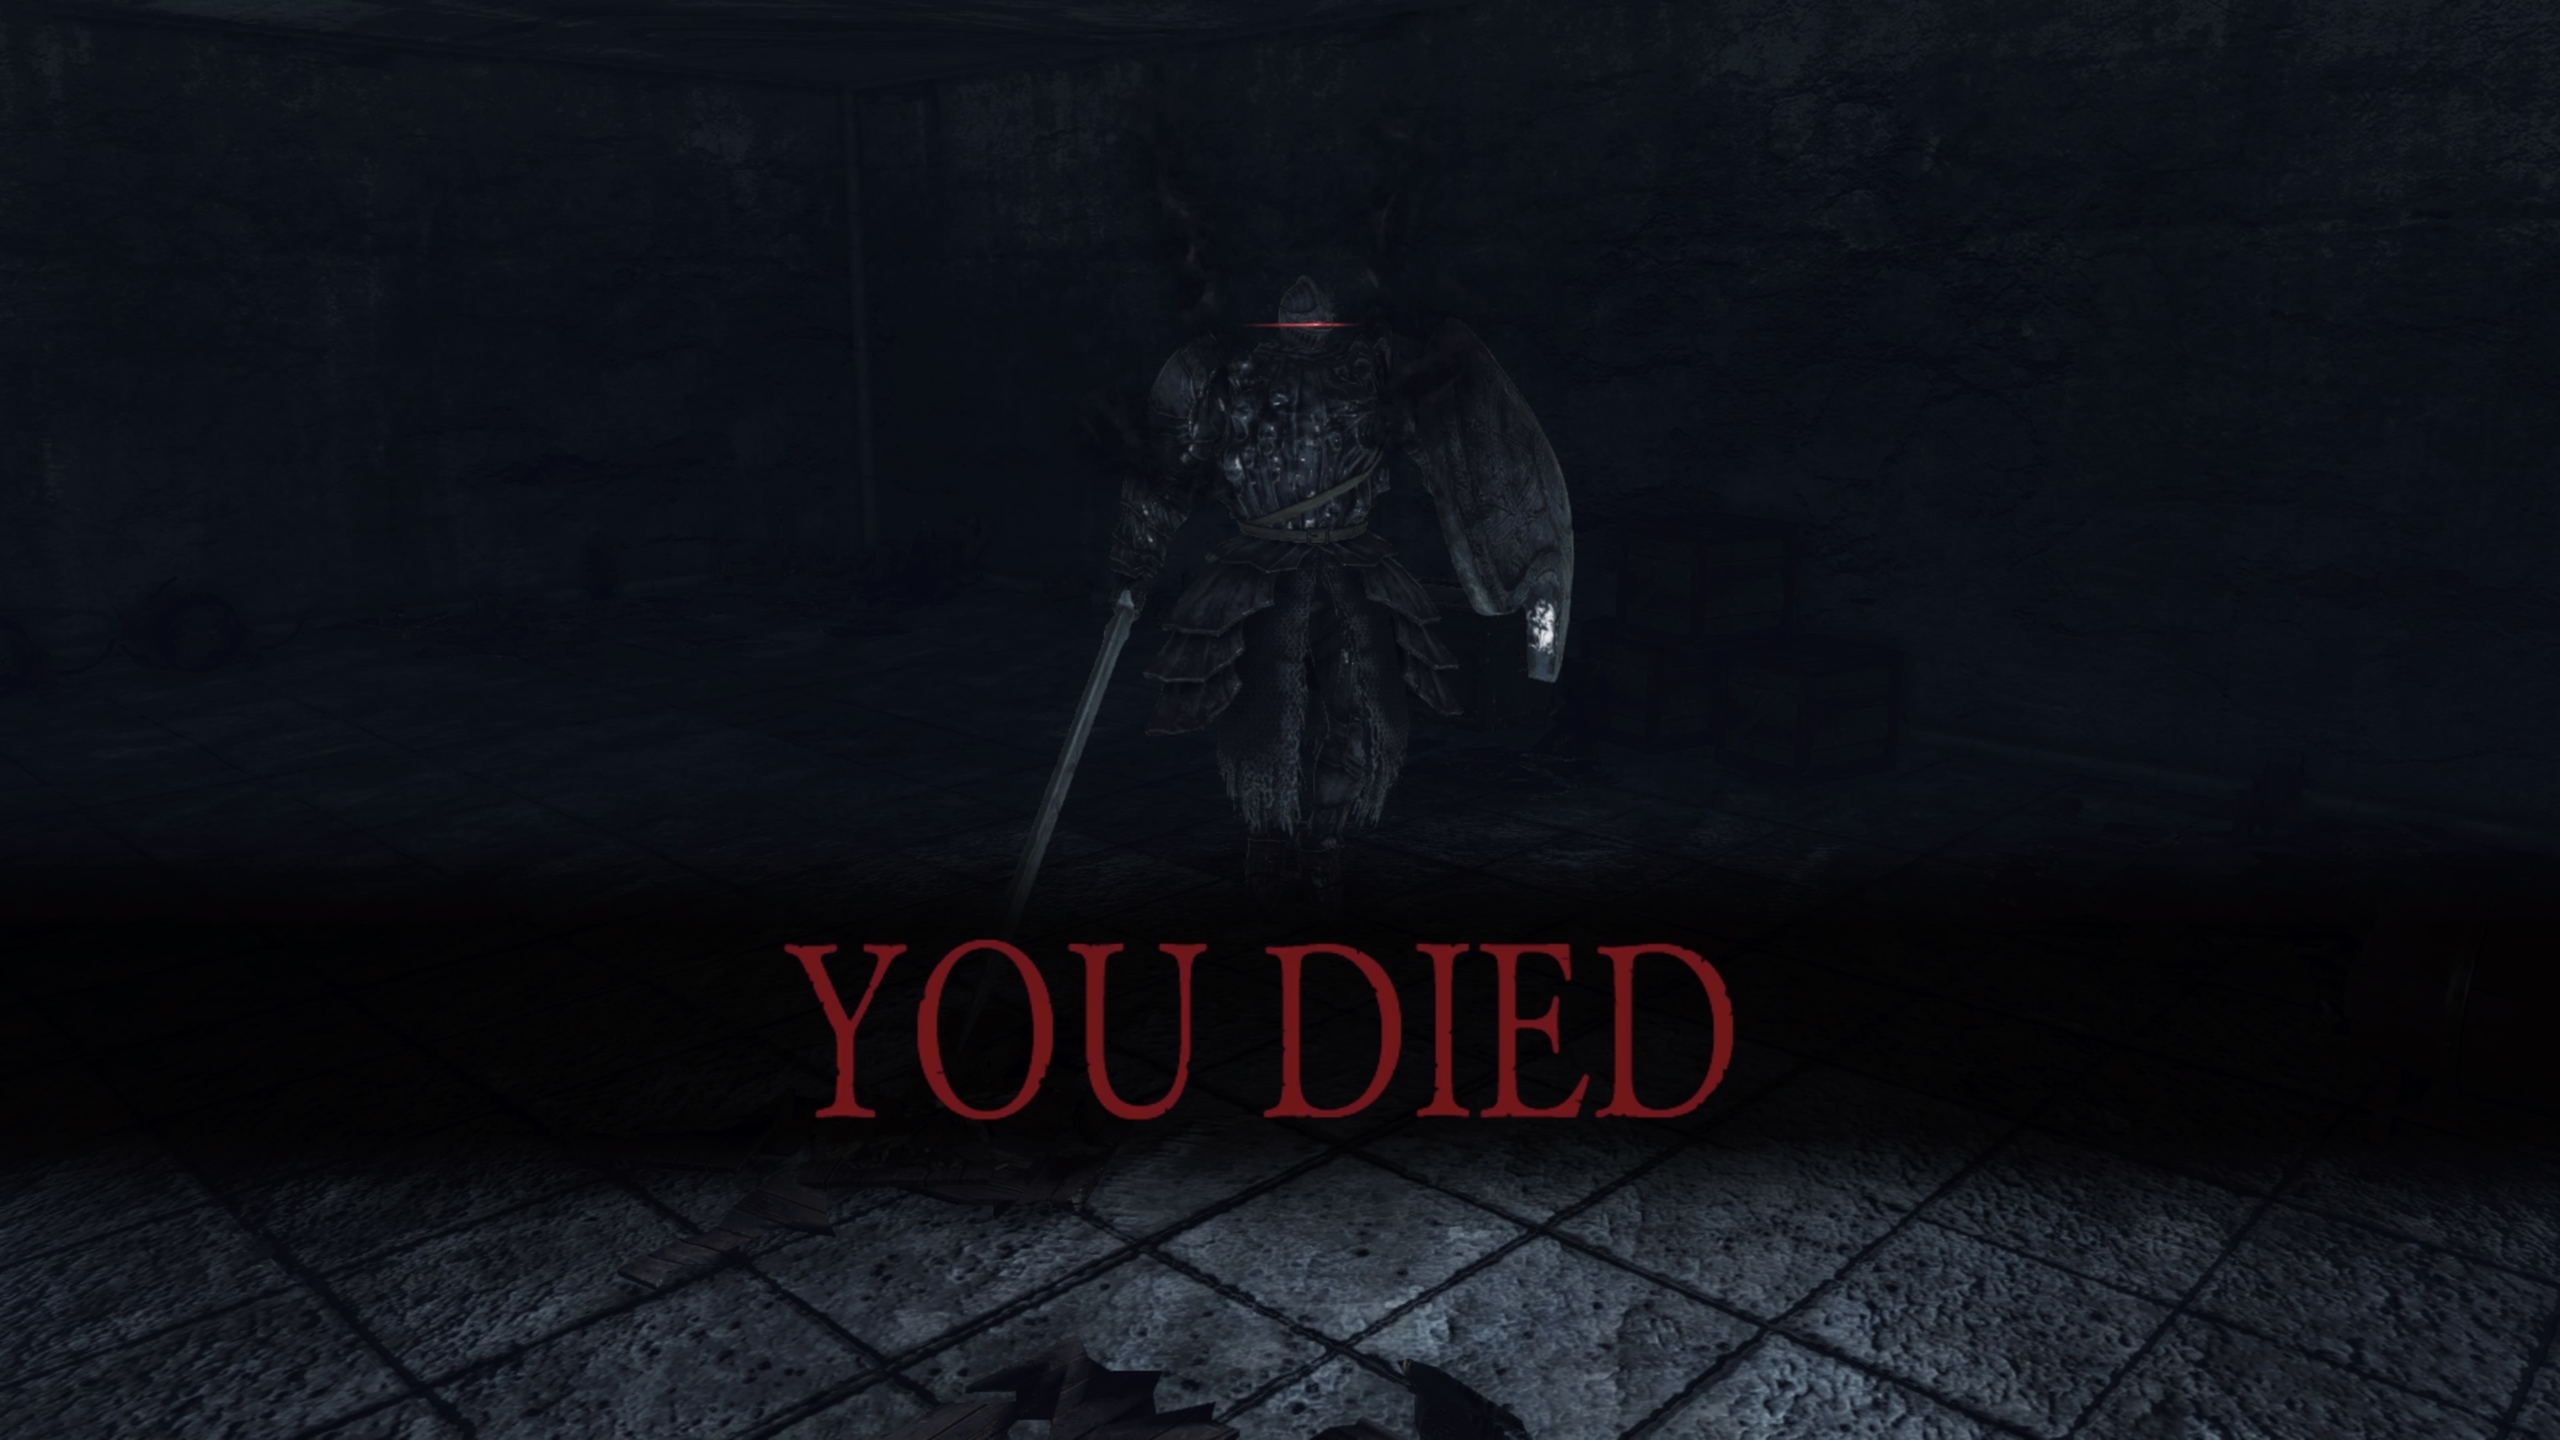 Dark Souls 2 beginners guide: how to stay alive (longer)